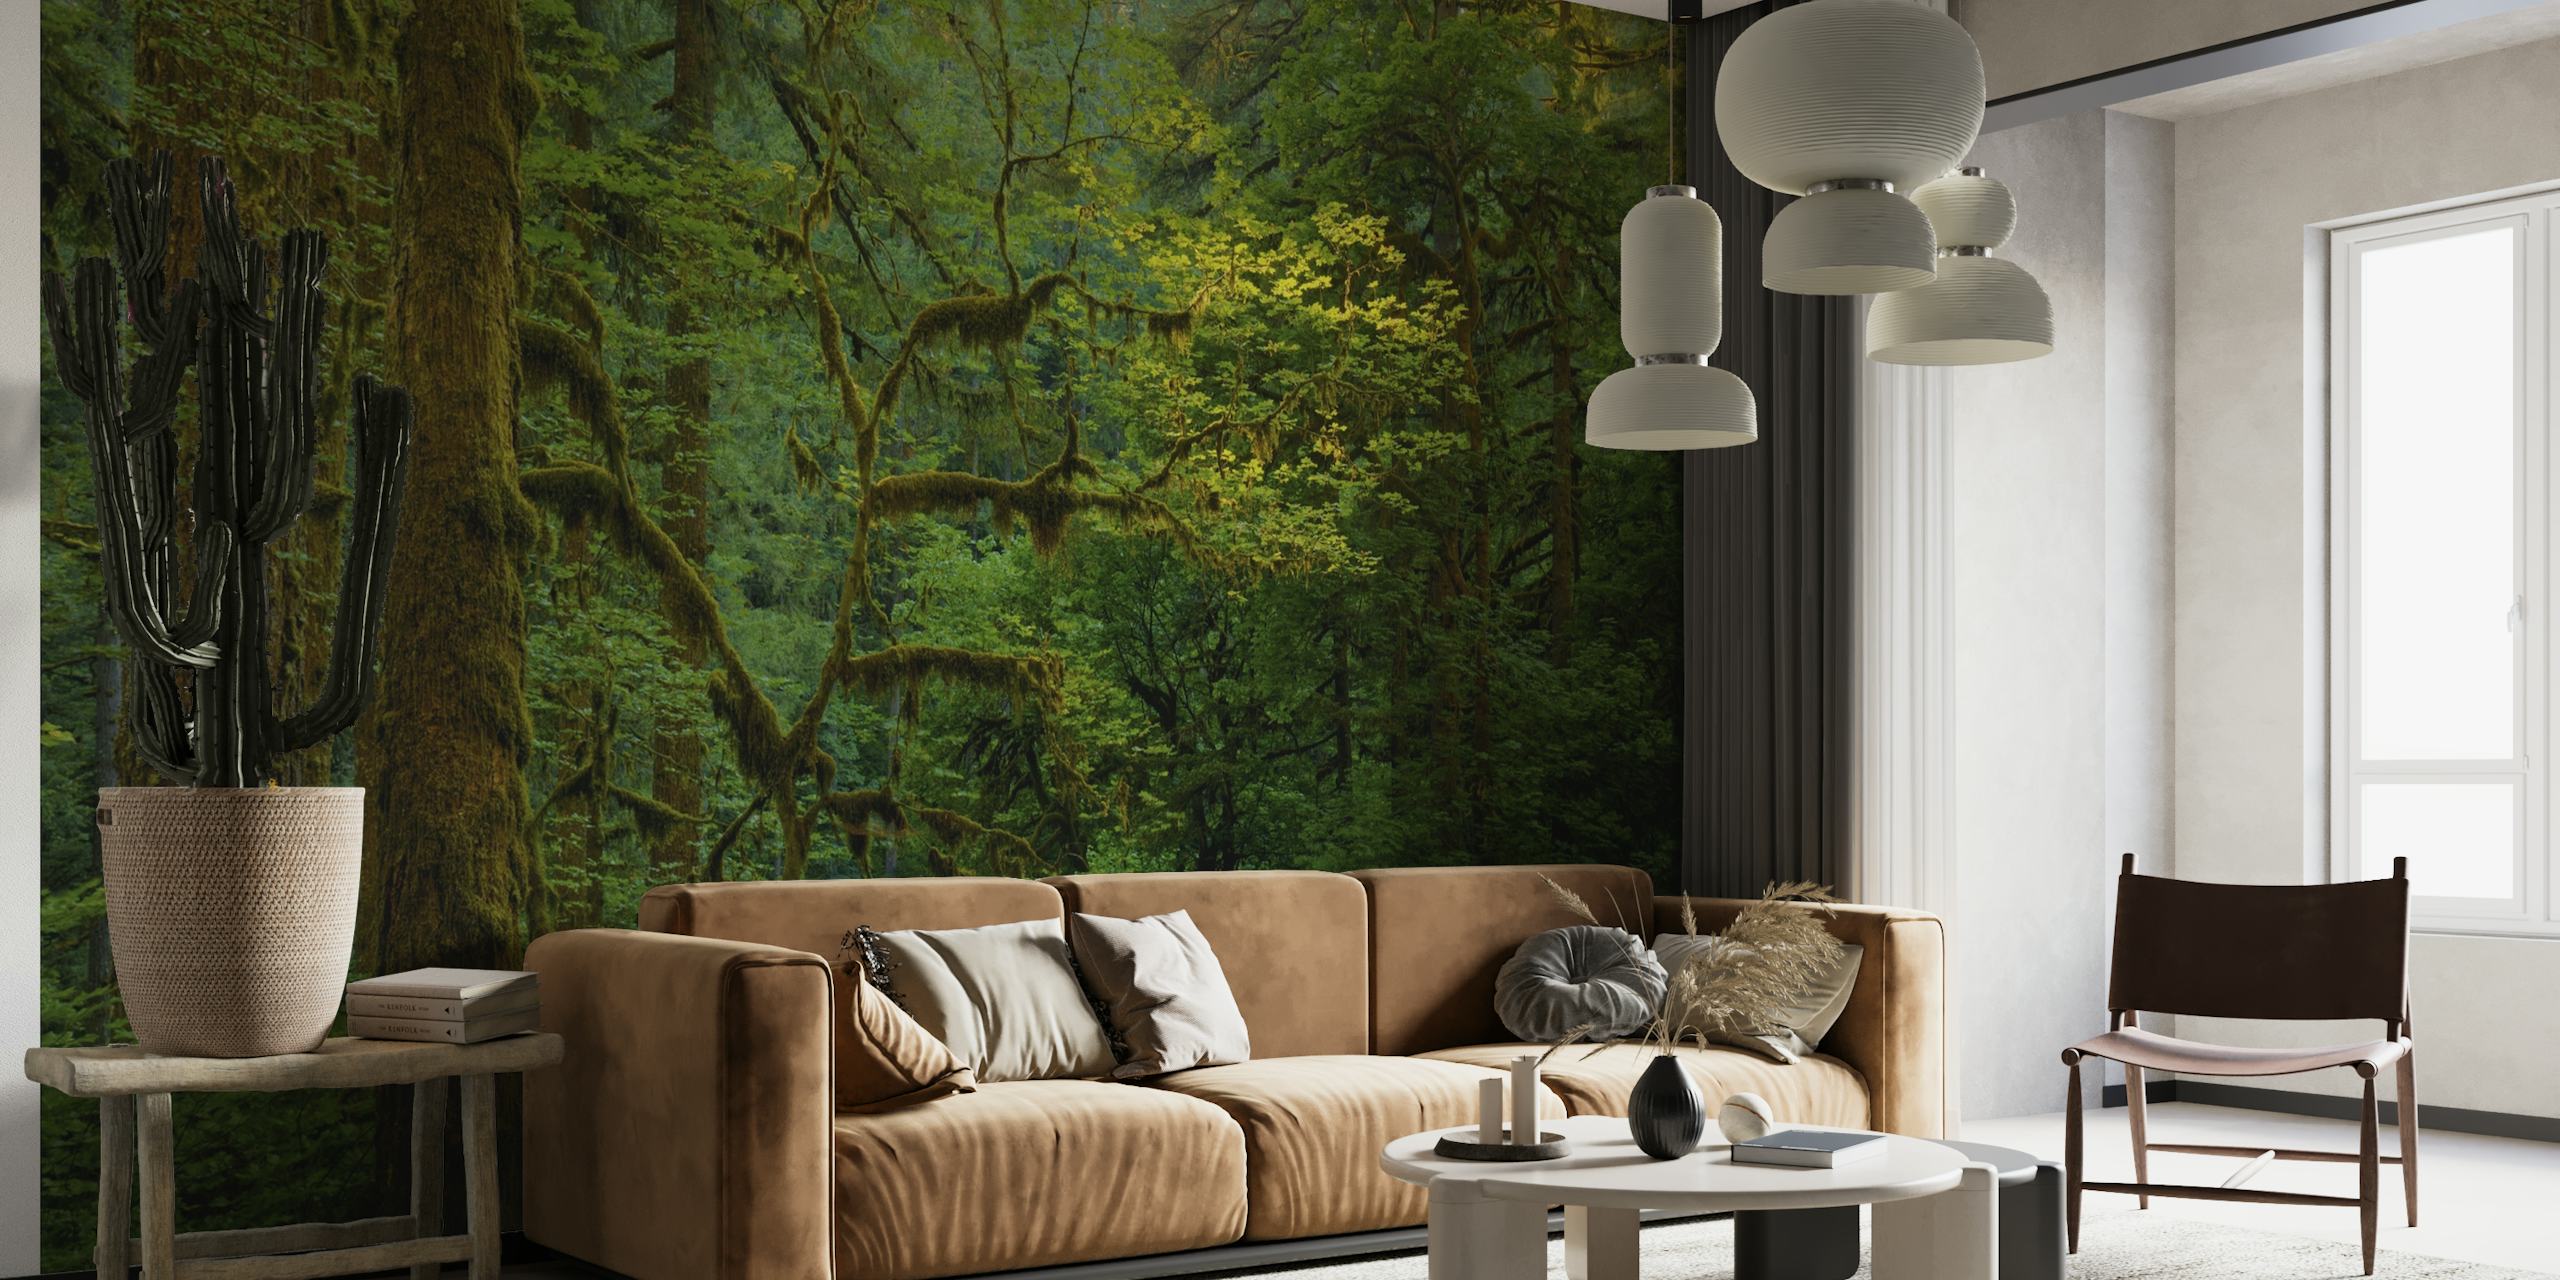 A wall mural depicting a serene forest scene with beams of light filtering through the dense foliage.